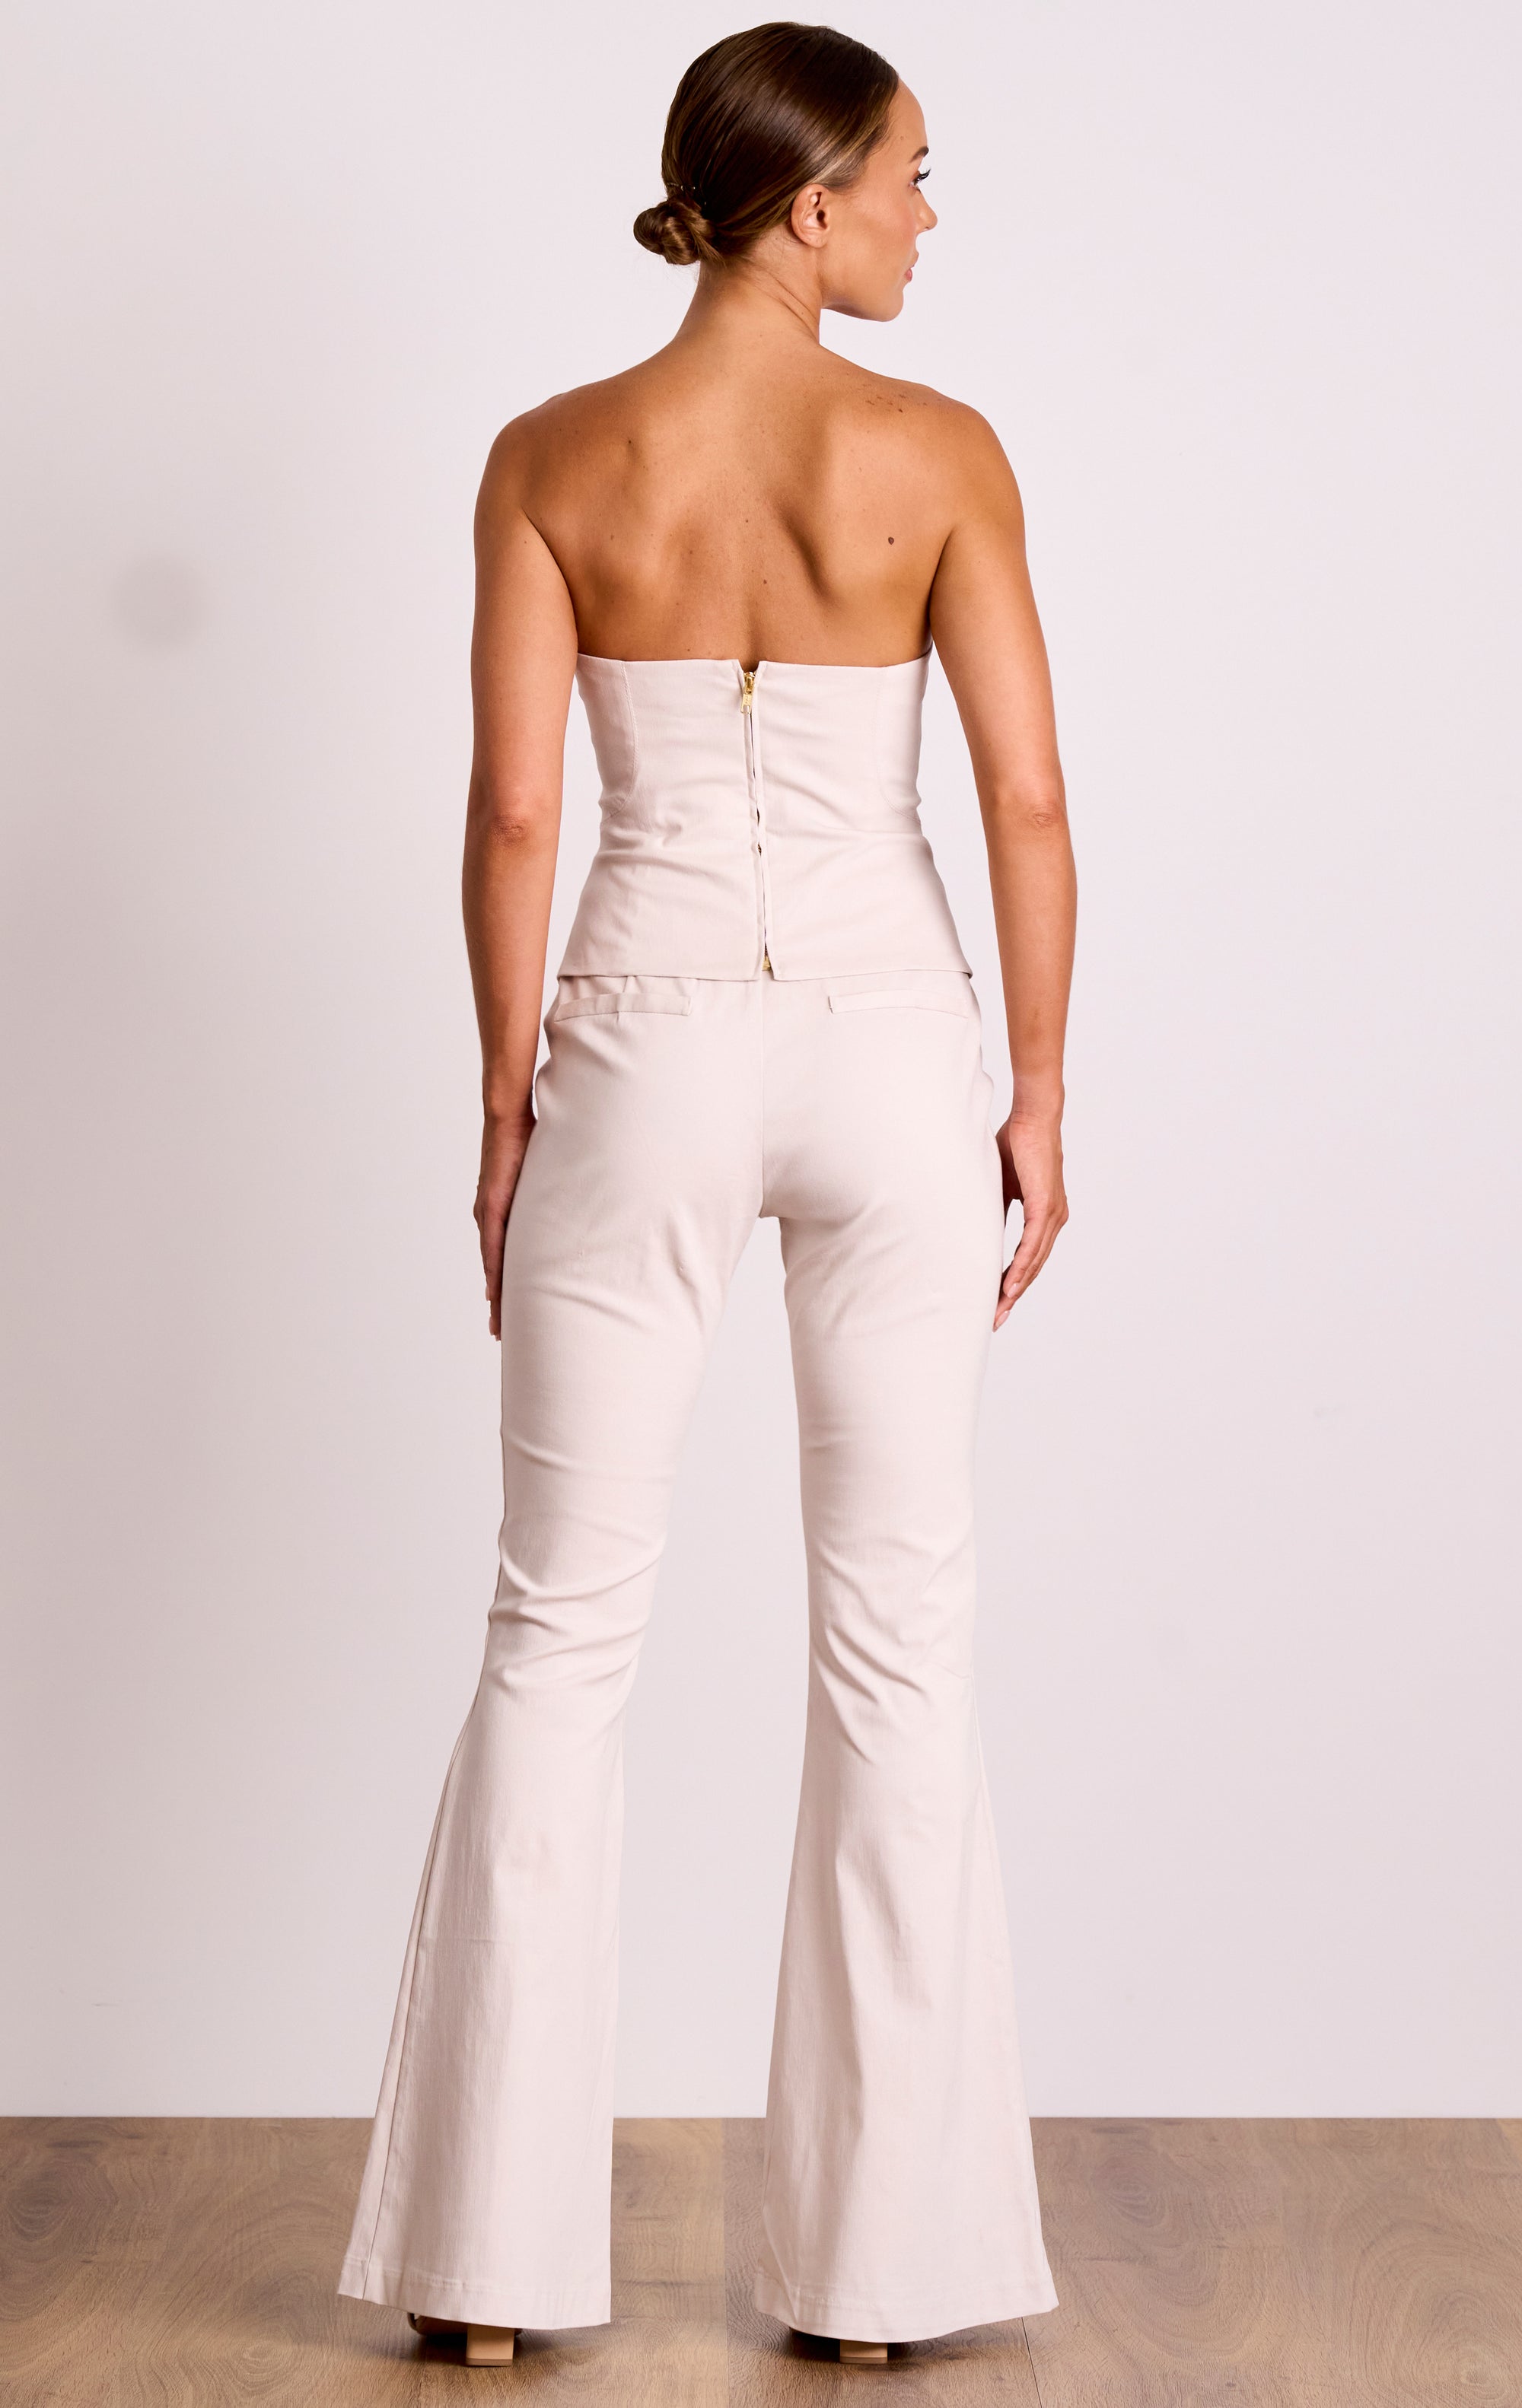 Delaney Bodice - TAKE 40% OFF DISCOUNT APPLIED AT CHECKOUT